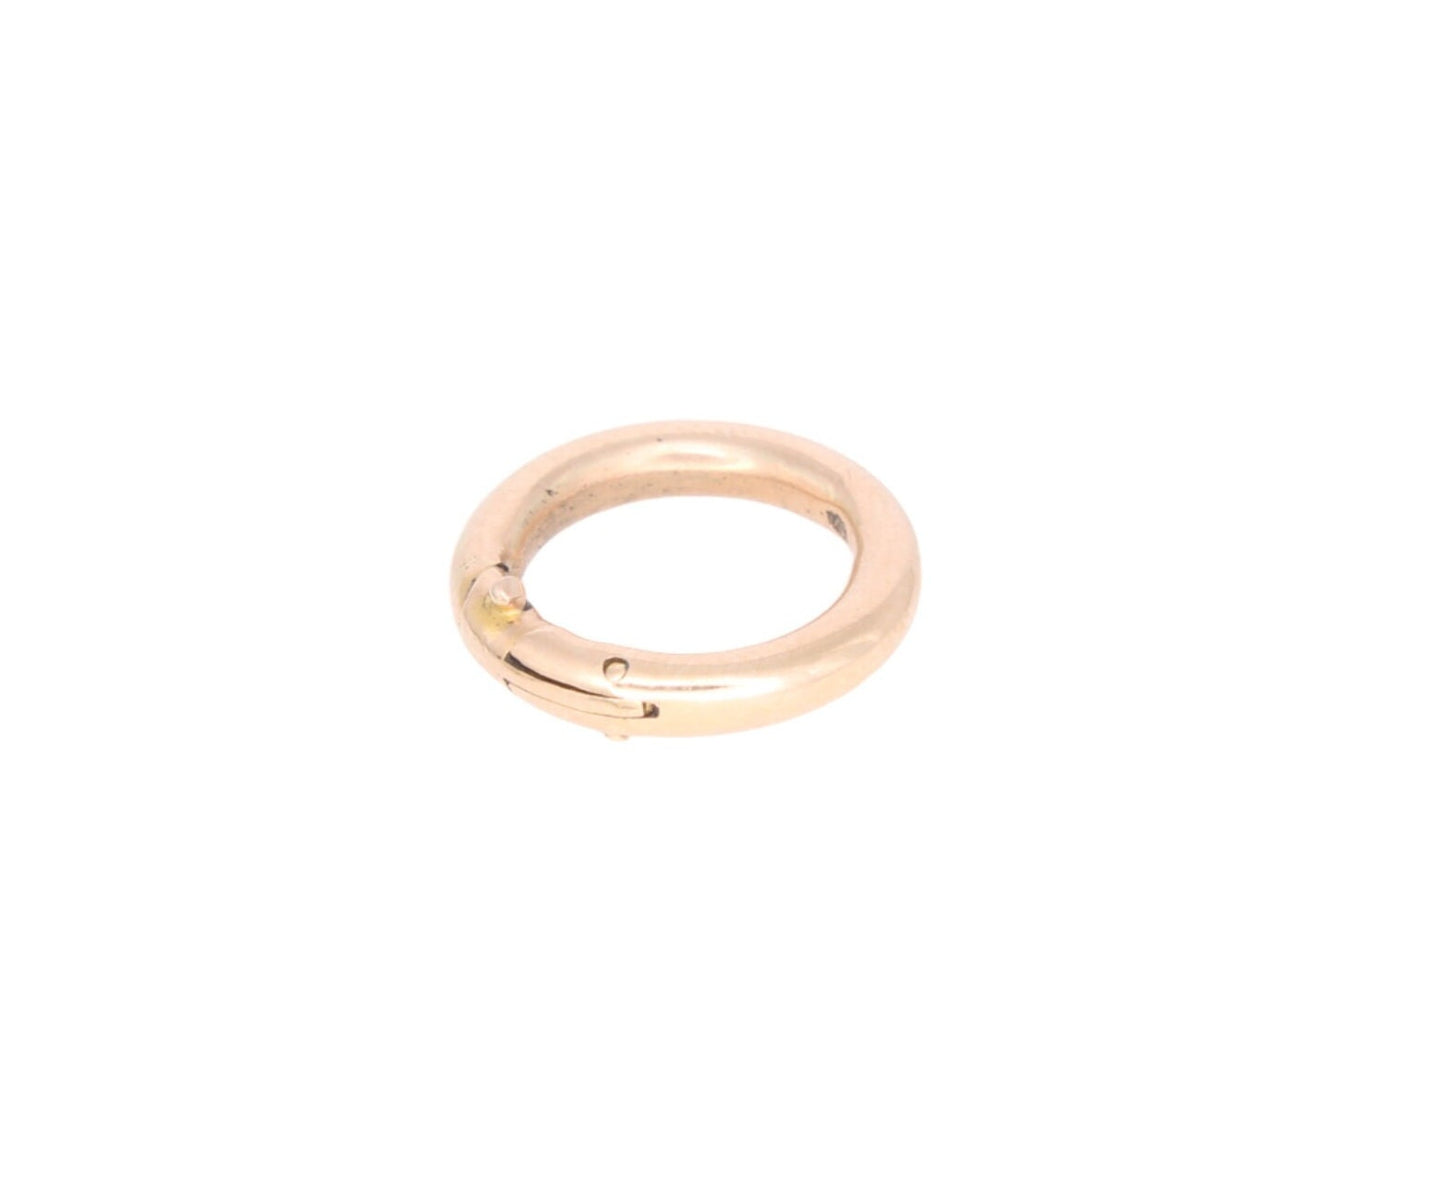 Antique 15ct Gold Hinged Bolt Ring